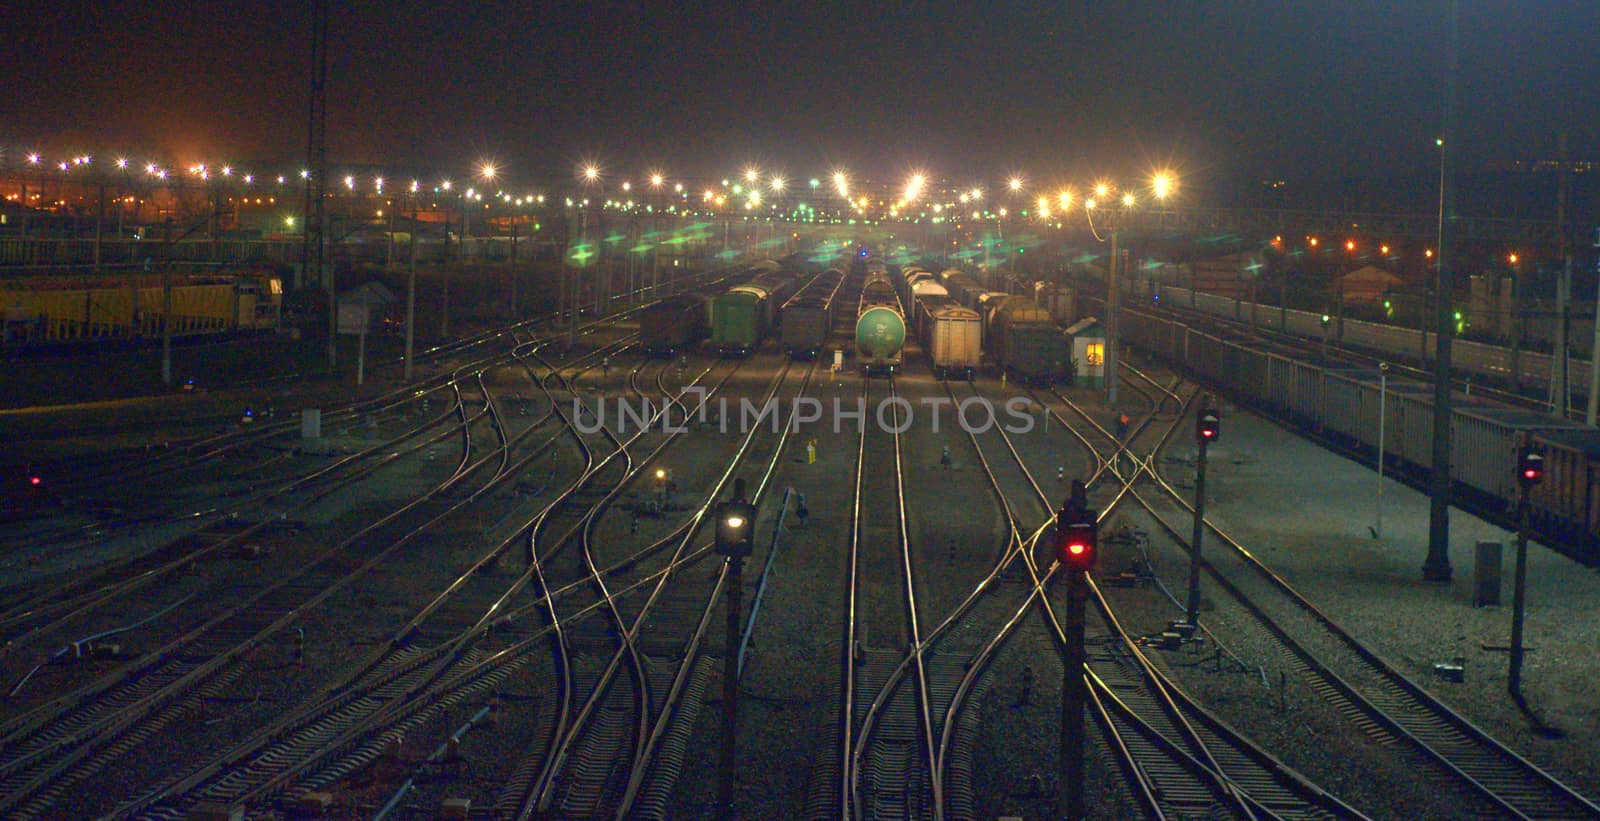 Night shooting of the crossing on the railway tracks, the bridging of the roads at the station flickers in the lights. Blur.